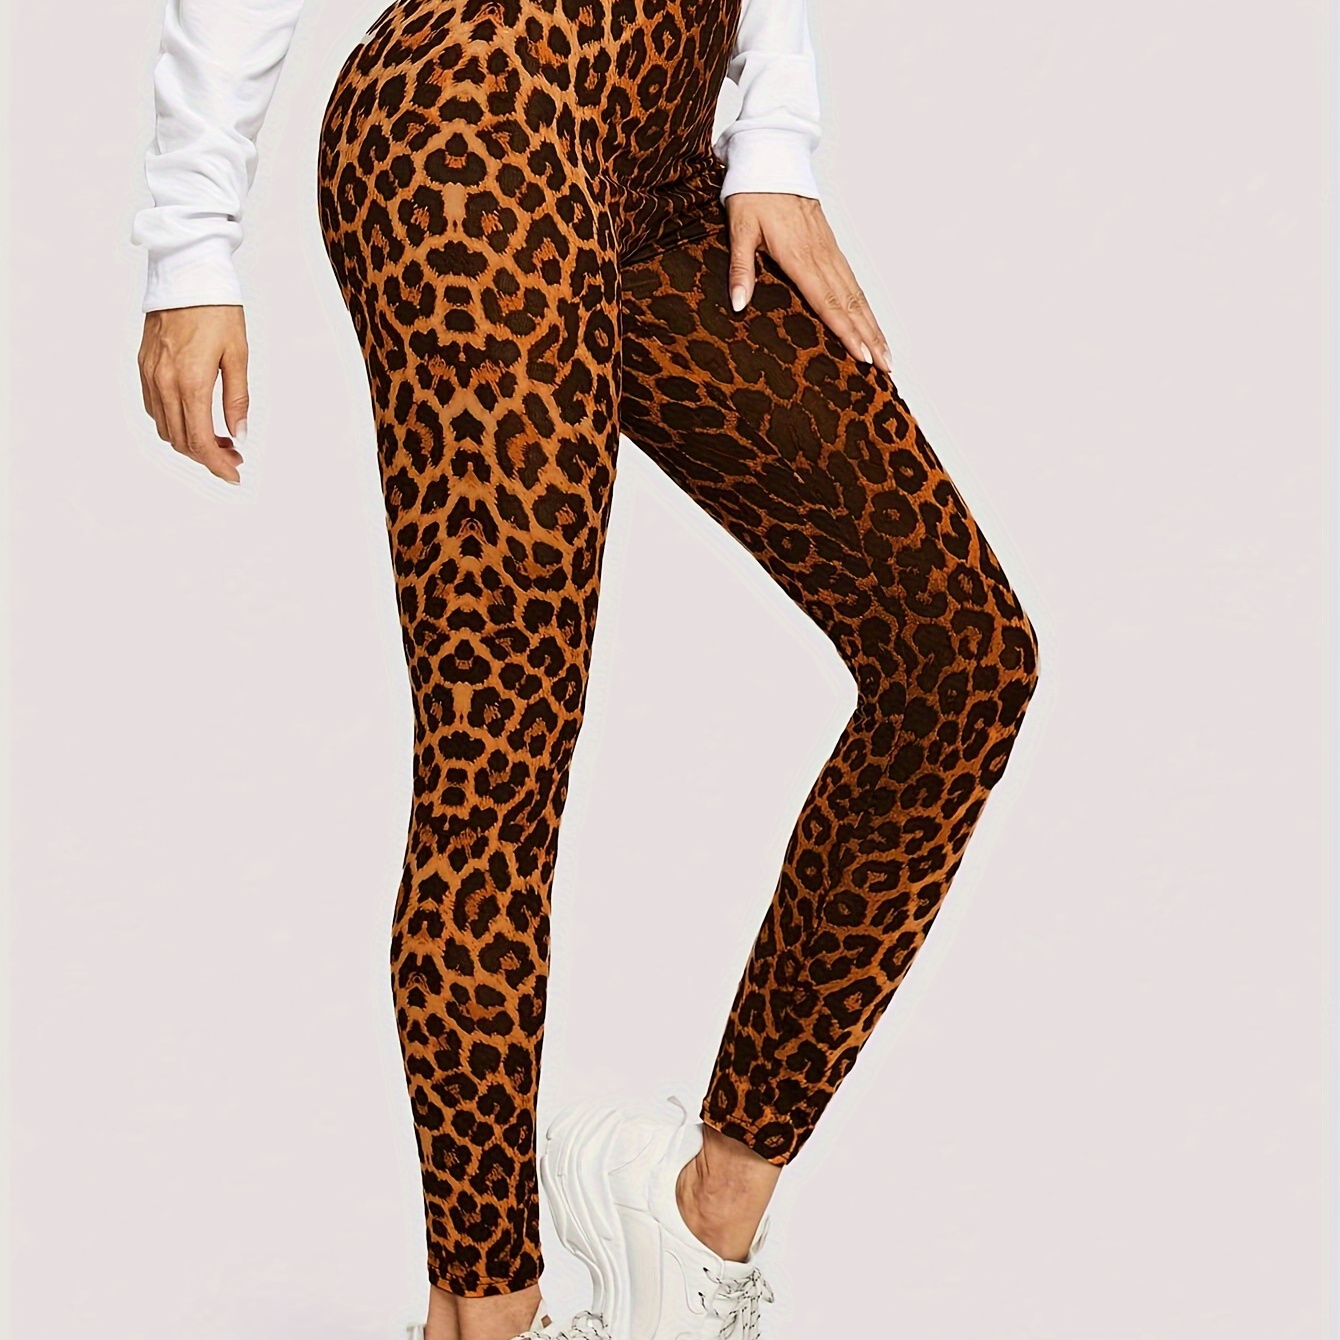 

Leopard Print High Waist Leggings, Casual Skinny Every Day Stretchy Leggings, Women's Clothing